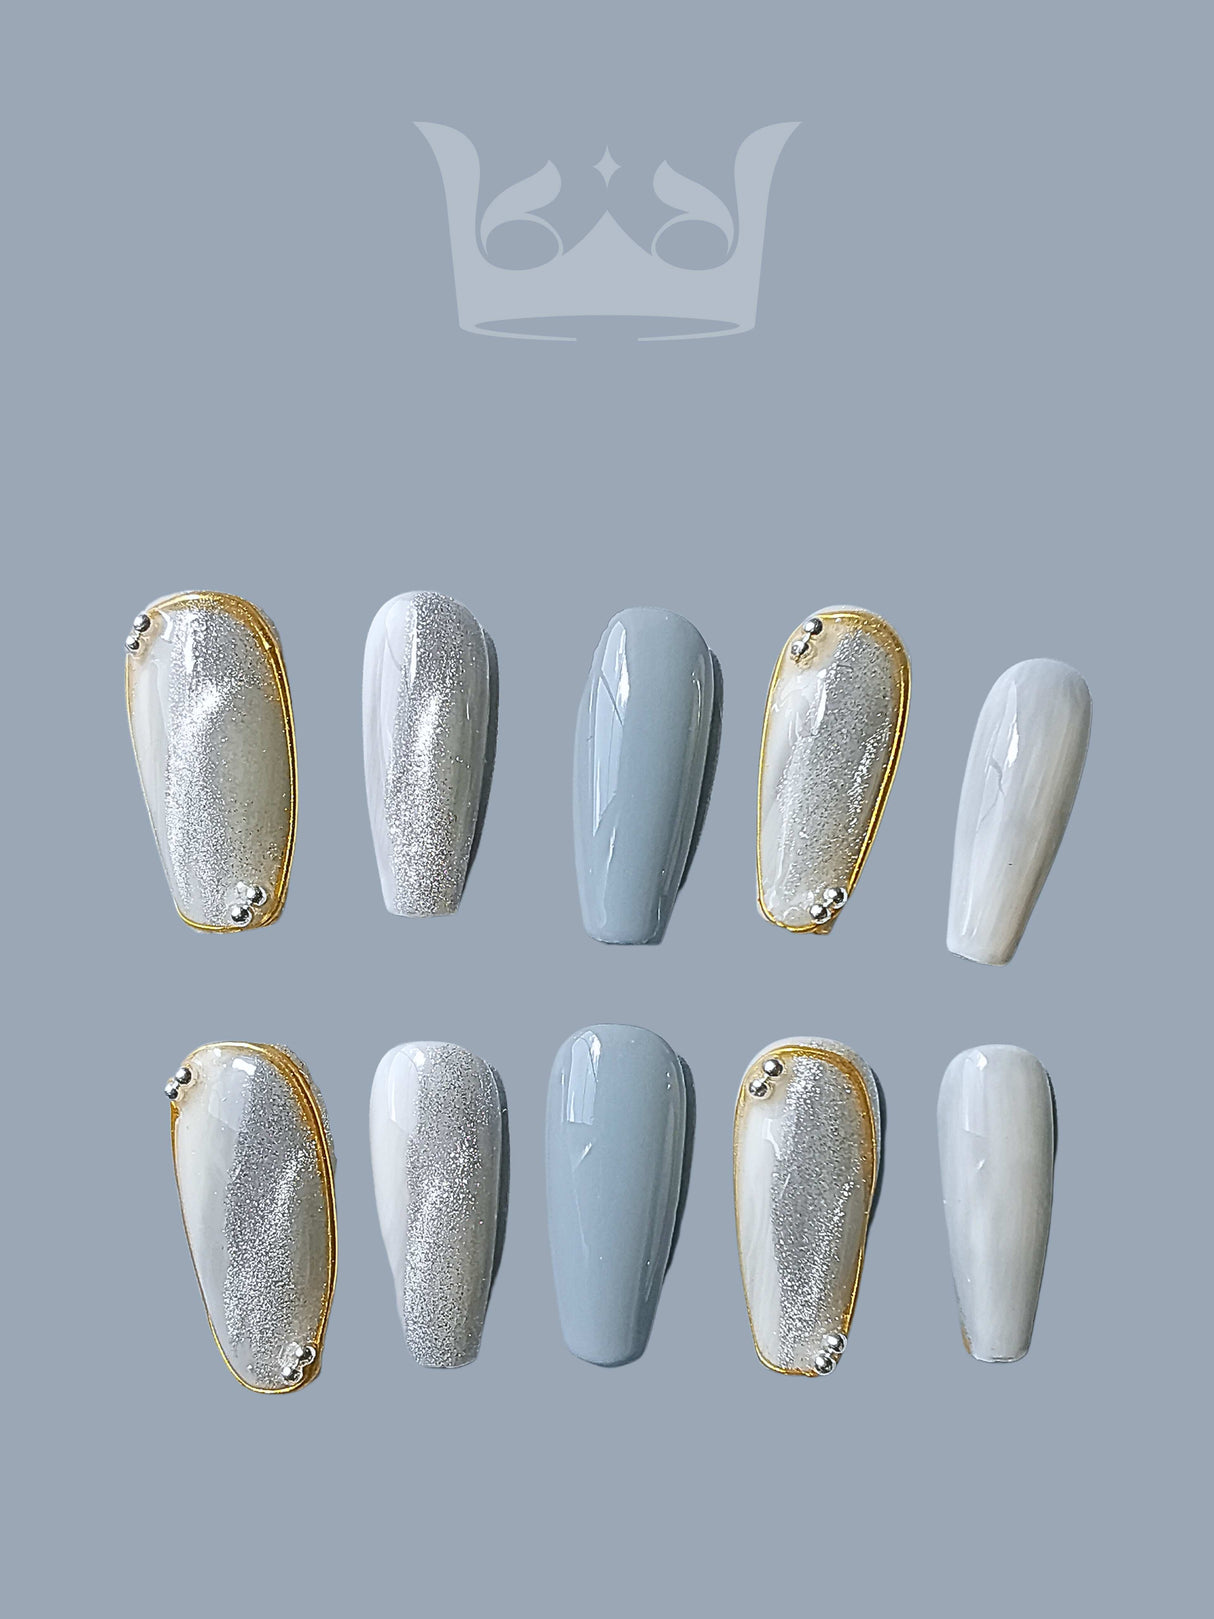 Sophisticated and stylish nails with cool-toned color palette, metallic and matte finishes, gold accents, and sleek shape for formal events or statement accessory.